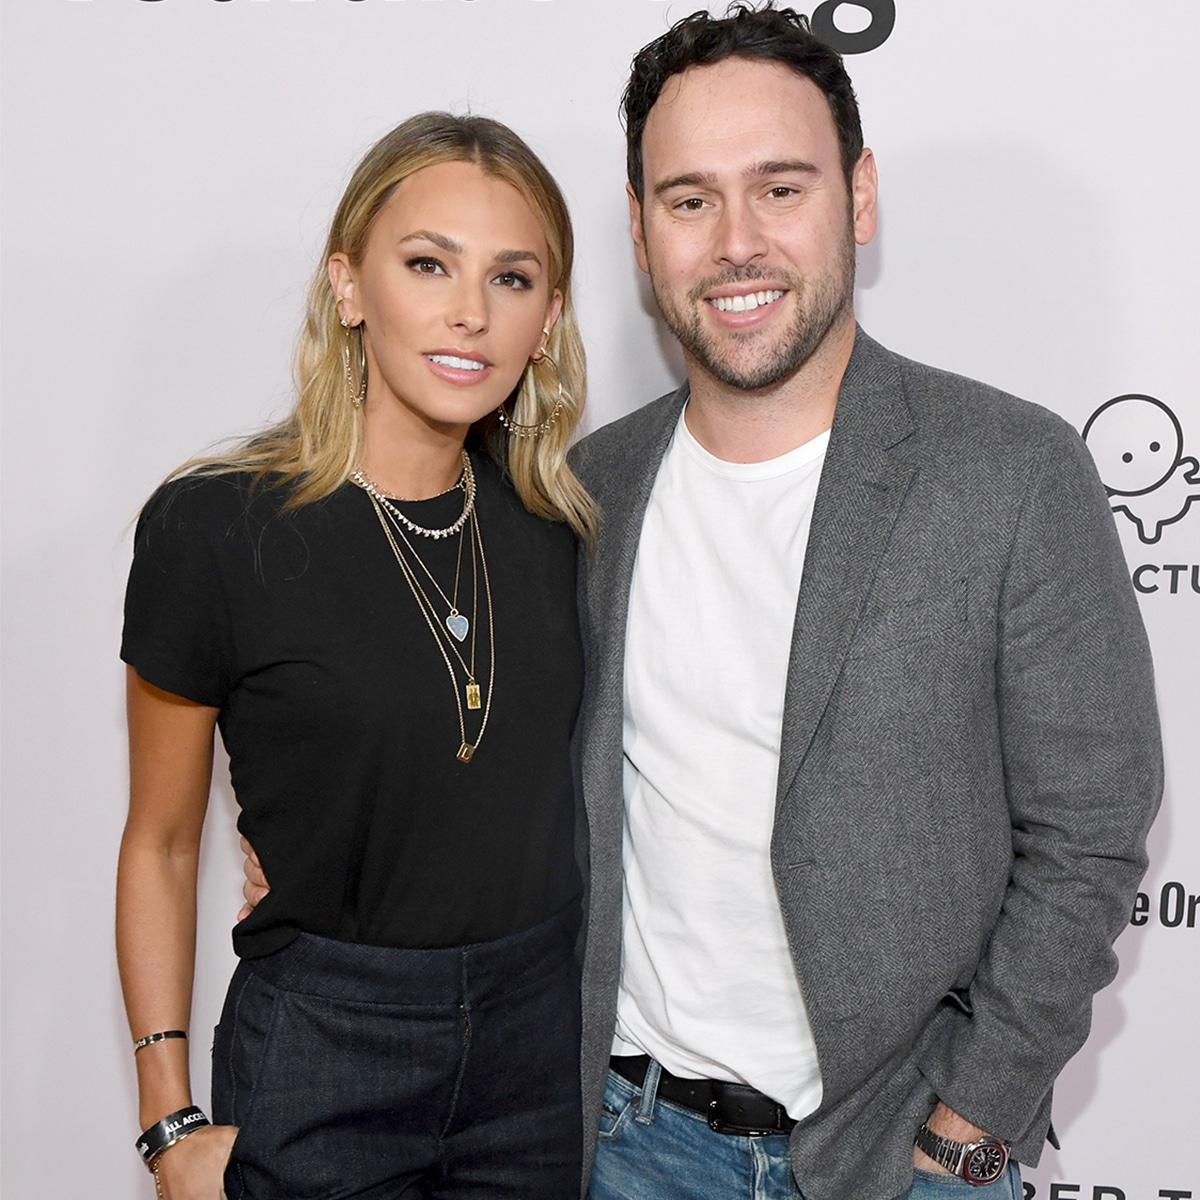 insekt Fritid Faciliteter Scooter Braun's Wife Yael Responds to His Divorce Filing - E! Online